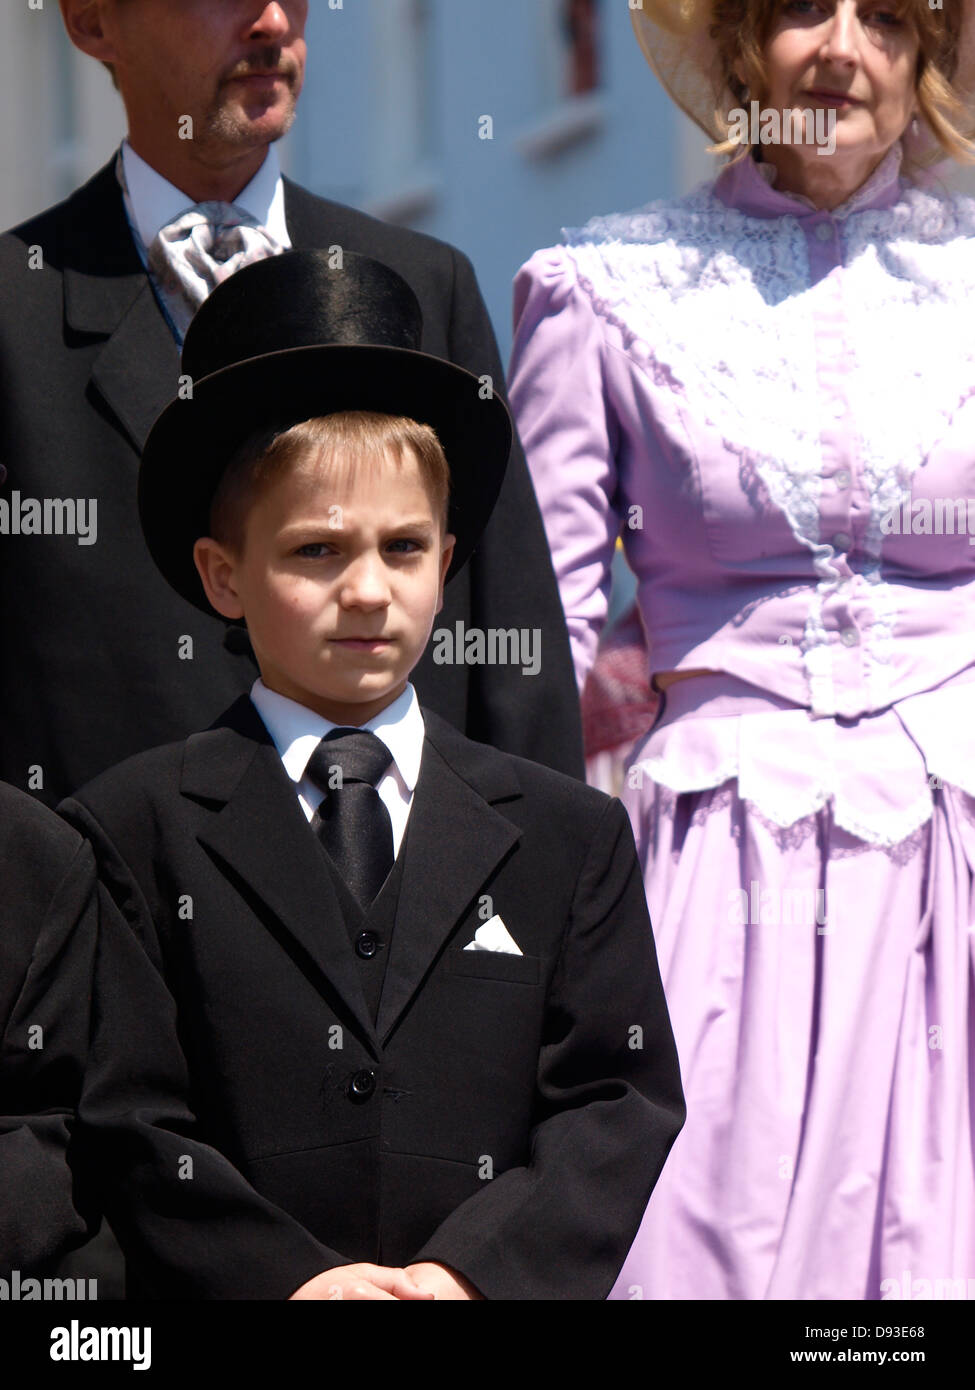 Young boy in a suit with top hat, Ilfracombe Victorian Celebration Parade, Devon, UK 2013 Stock Photo